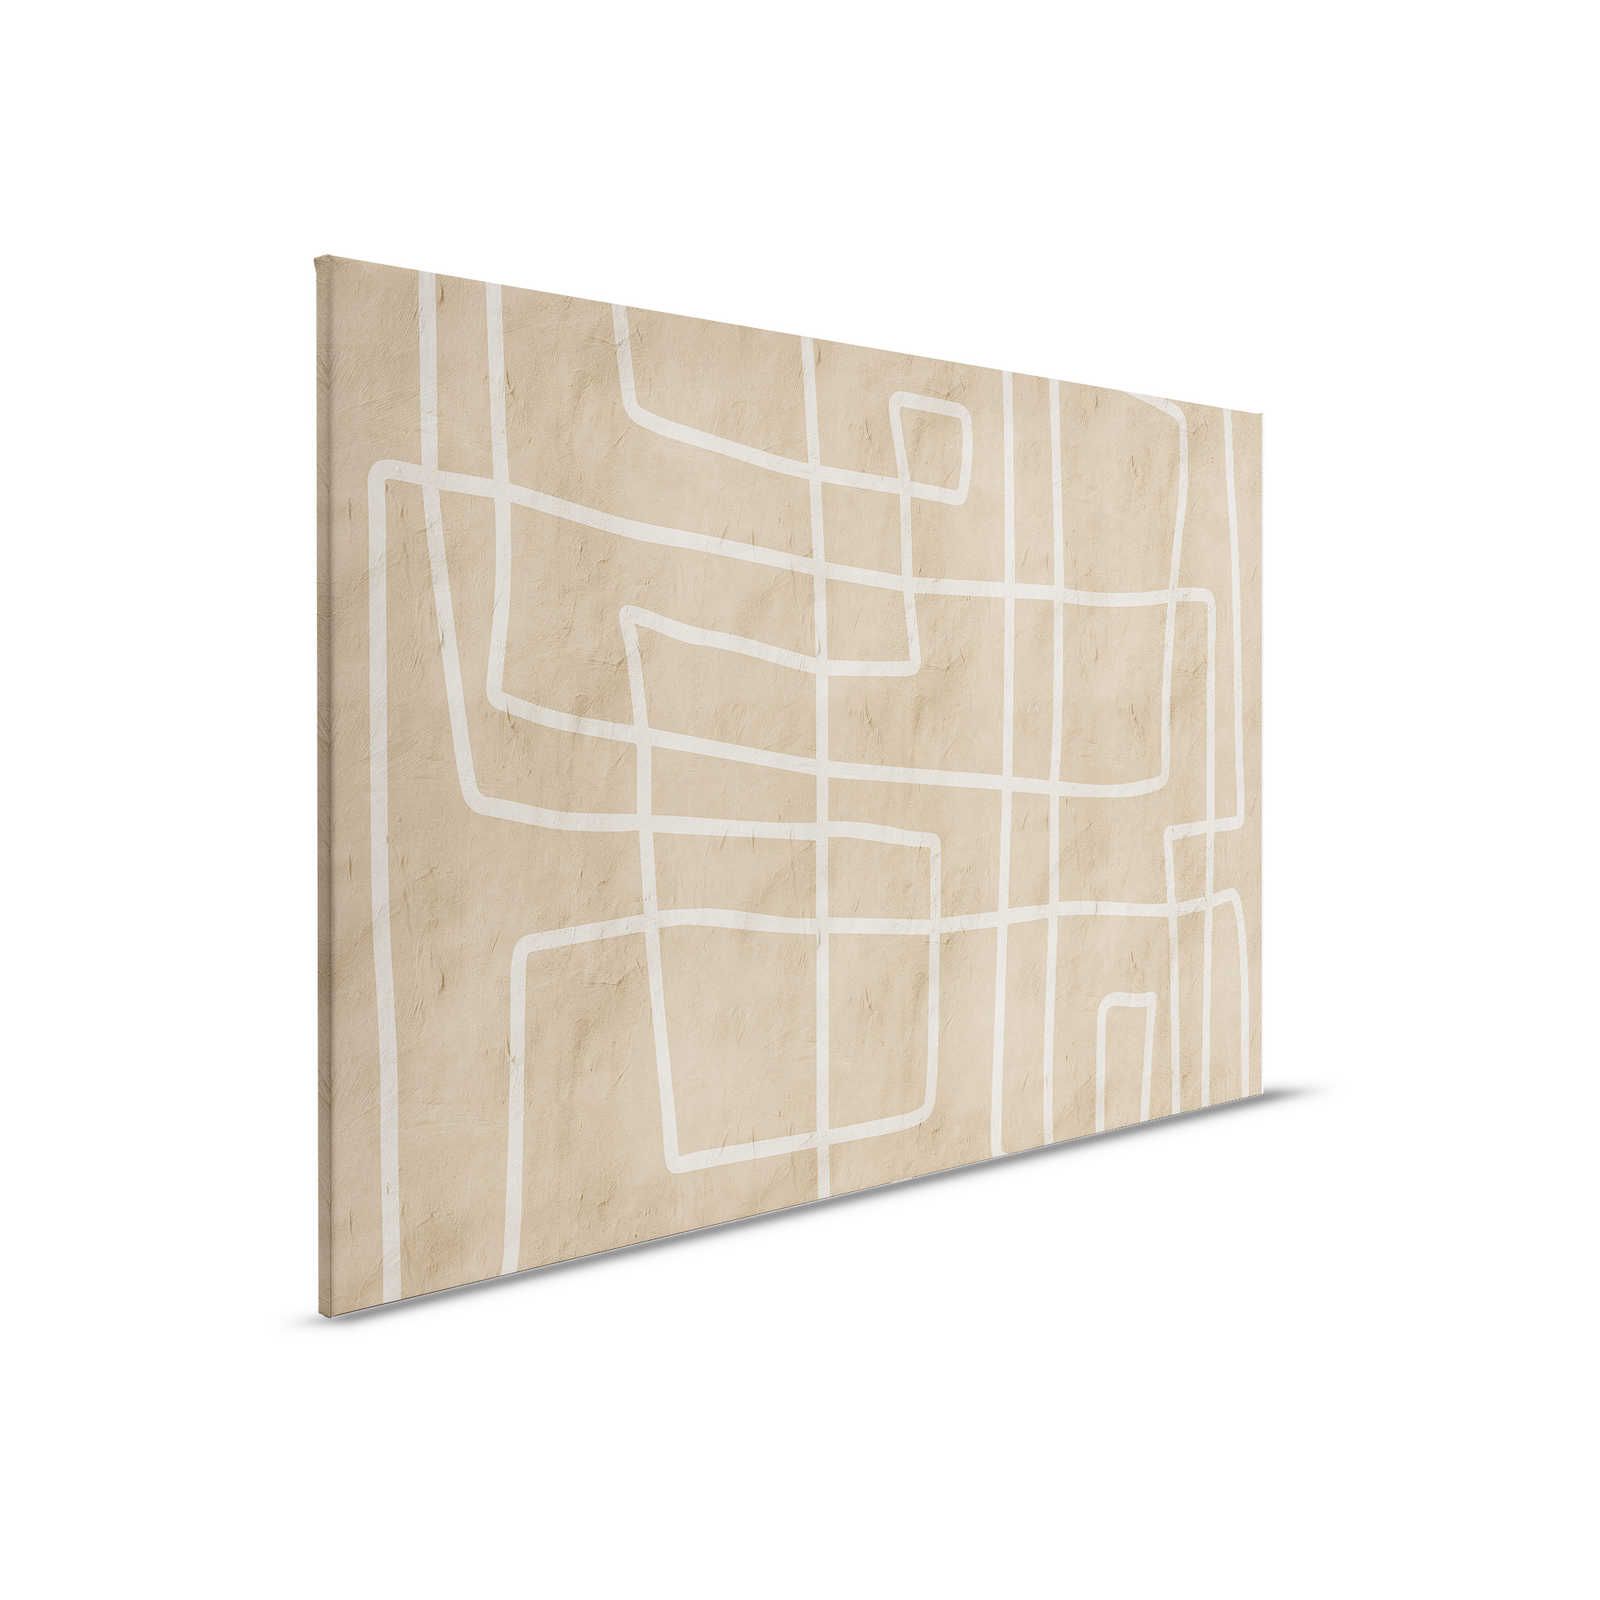         Serengeti 1 - Clay wall canvas painting with ethno line pattern in beige - 0.90 m x 0.60 m
    